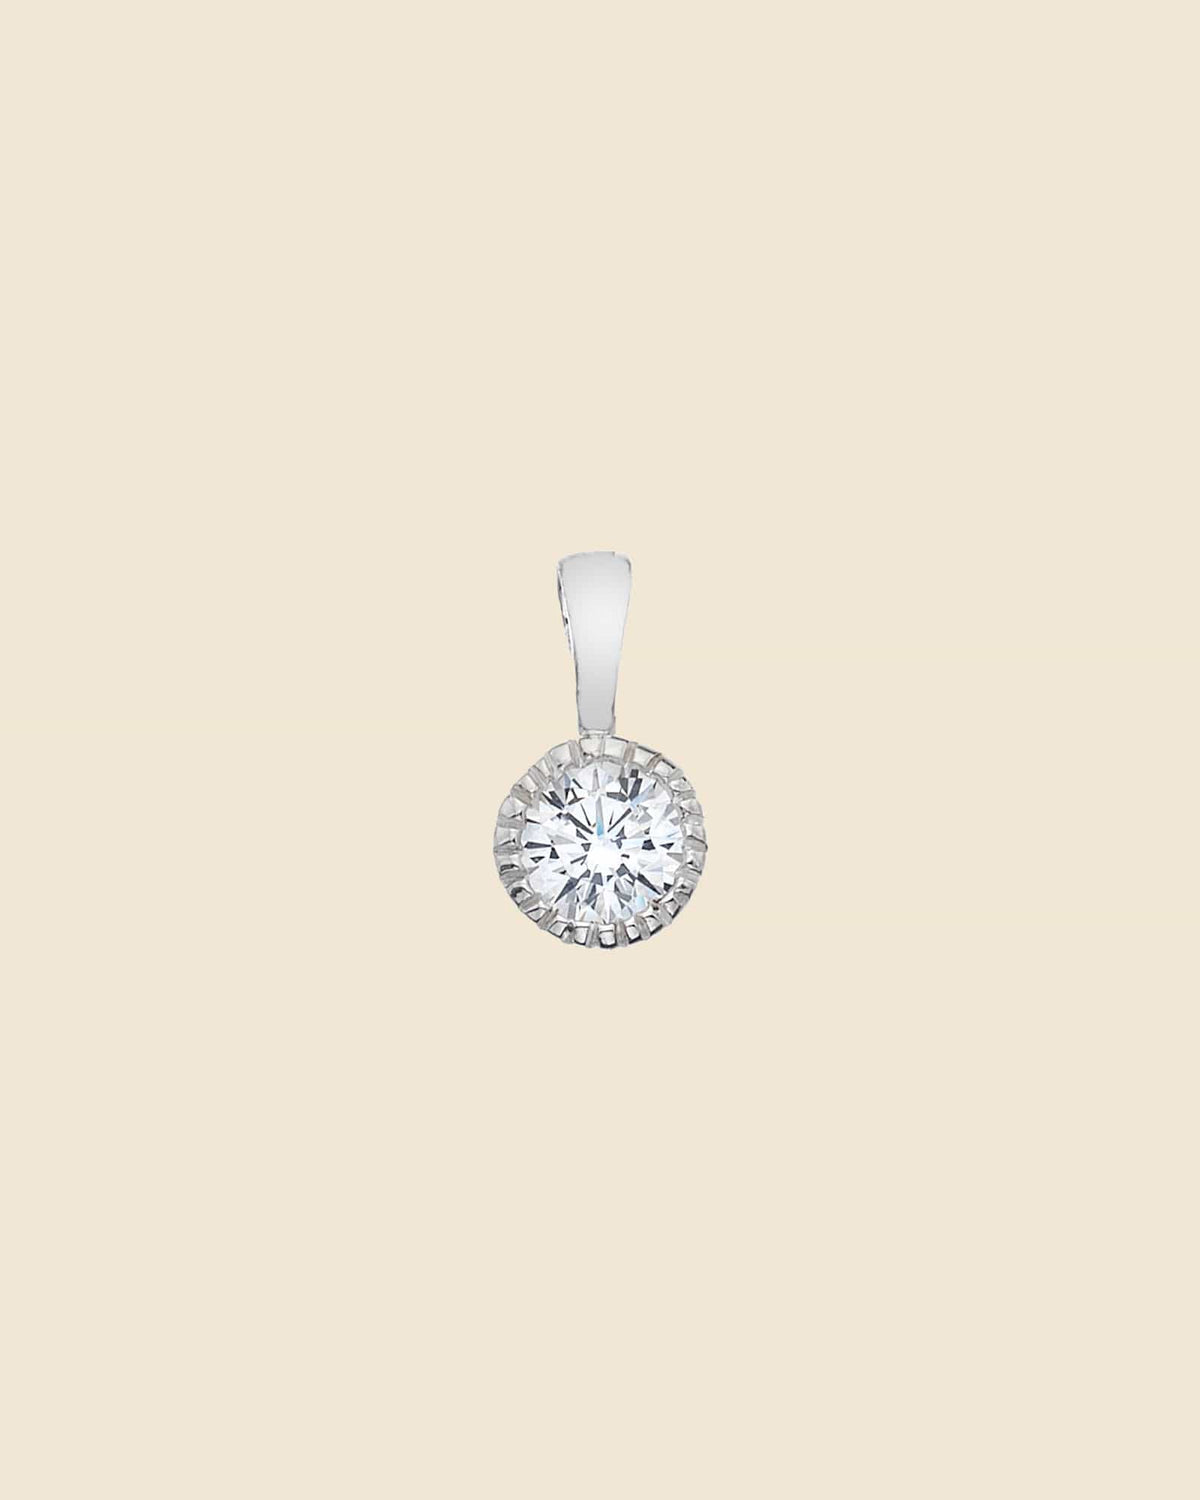 Small Sterling Silver and Cubic Zirconia Round Pendant